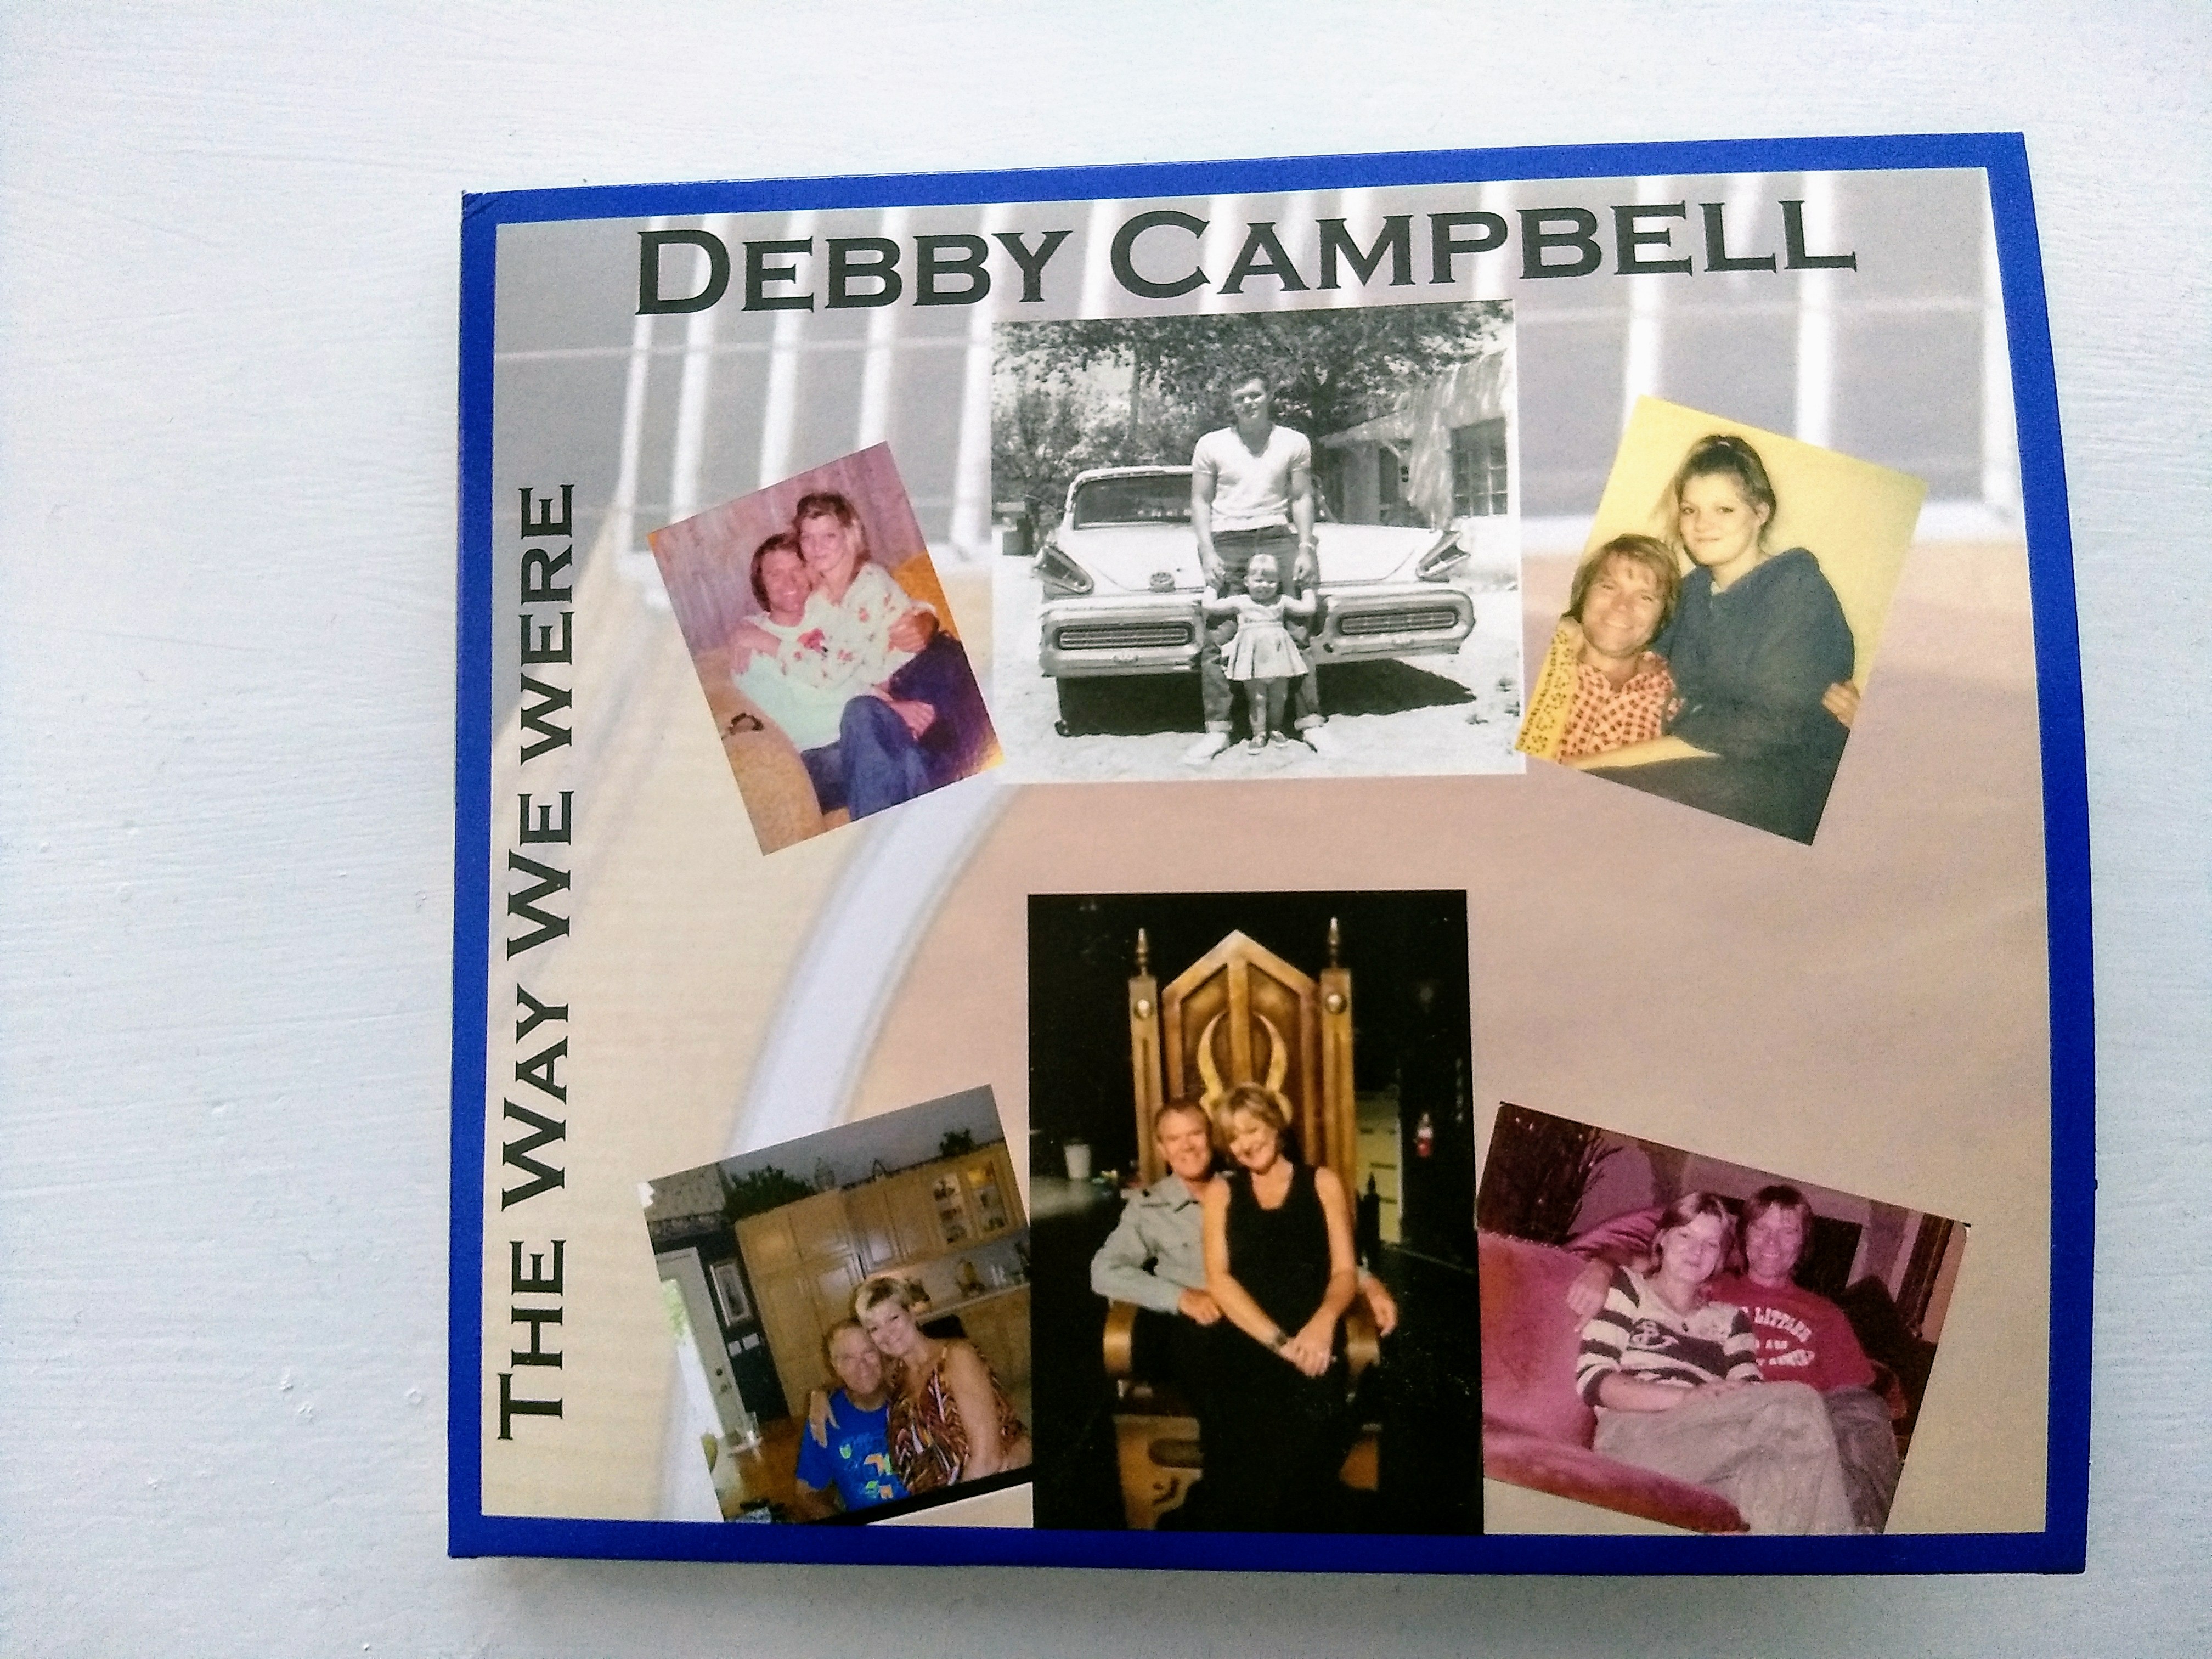 Debby Campbell's new album The Way We Were